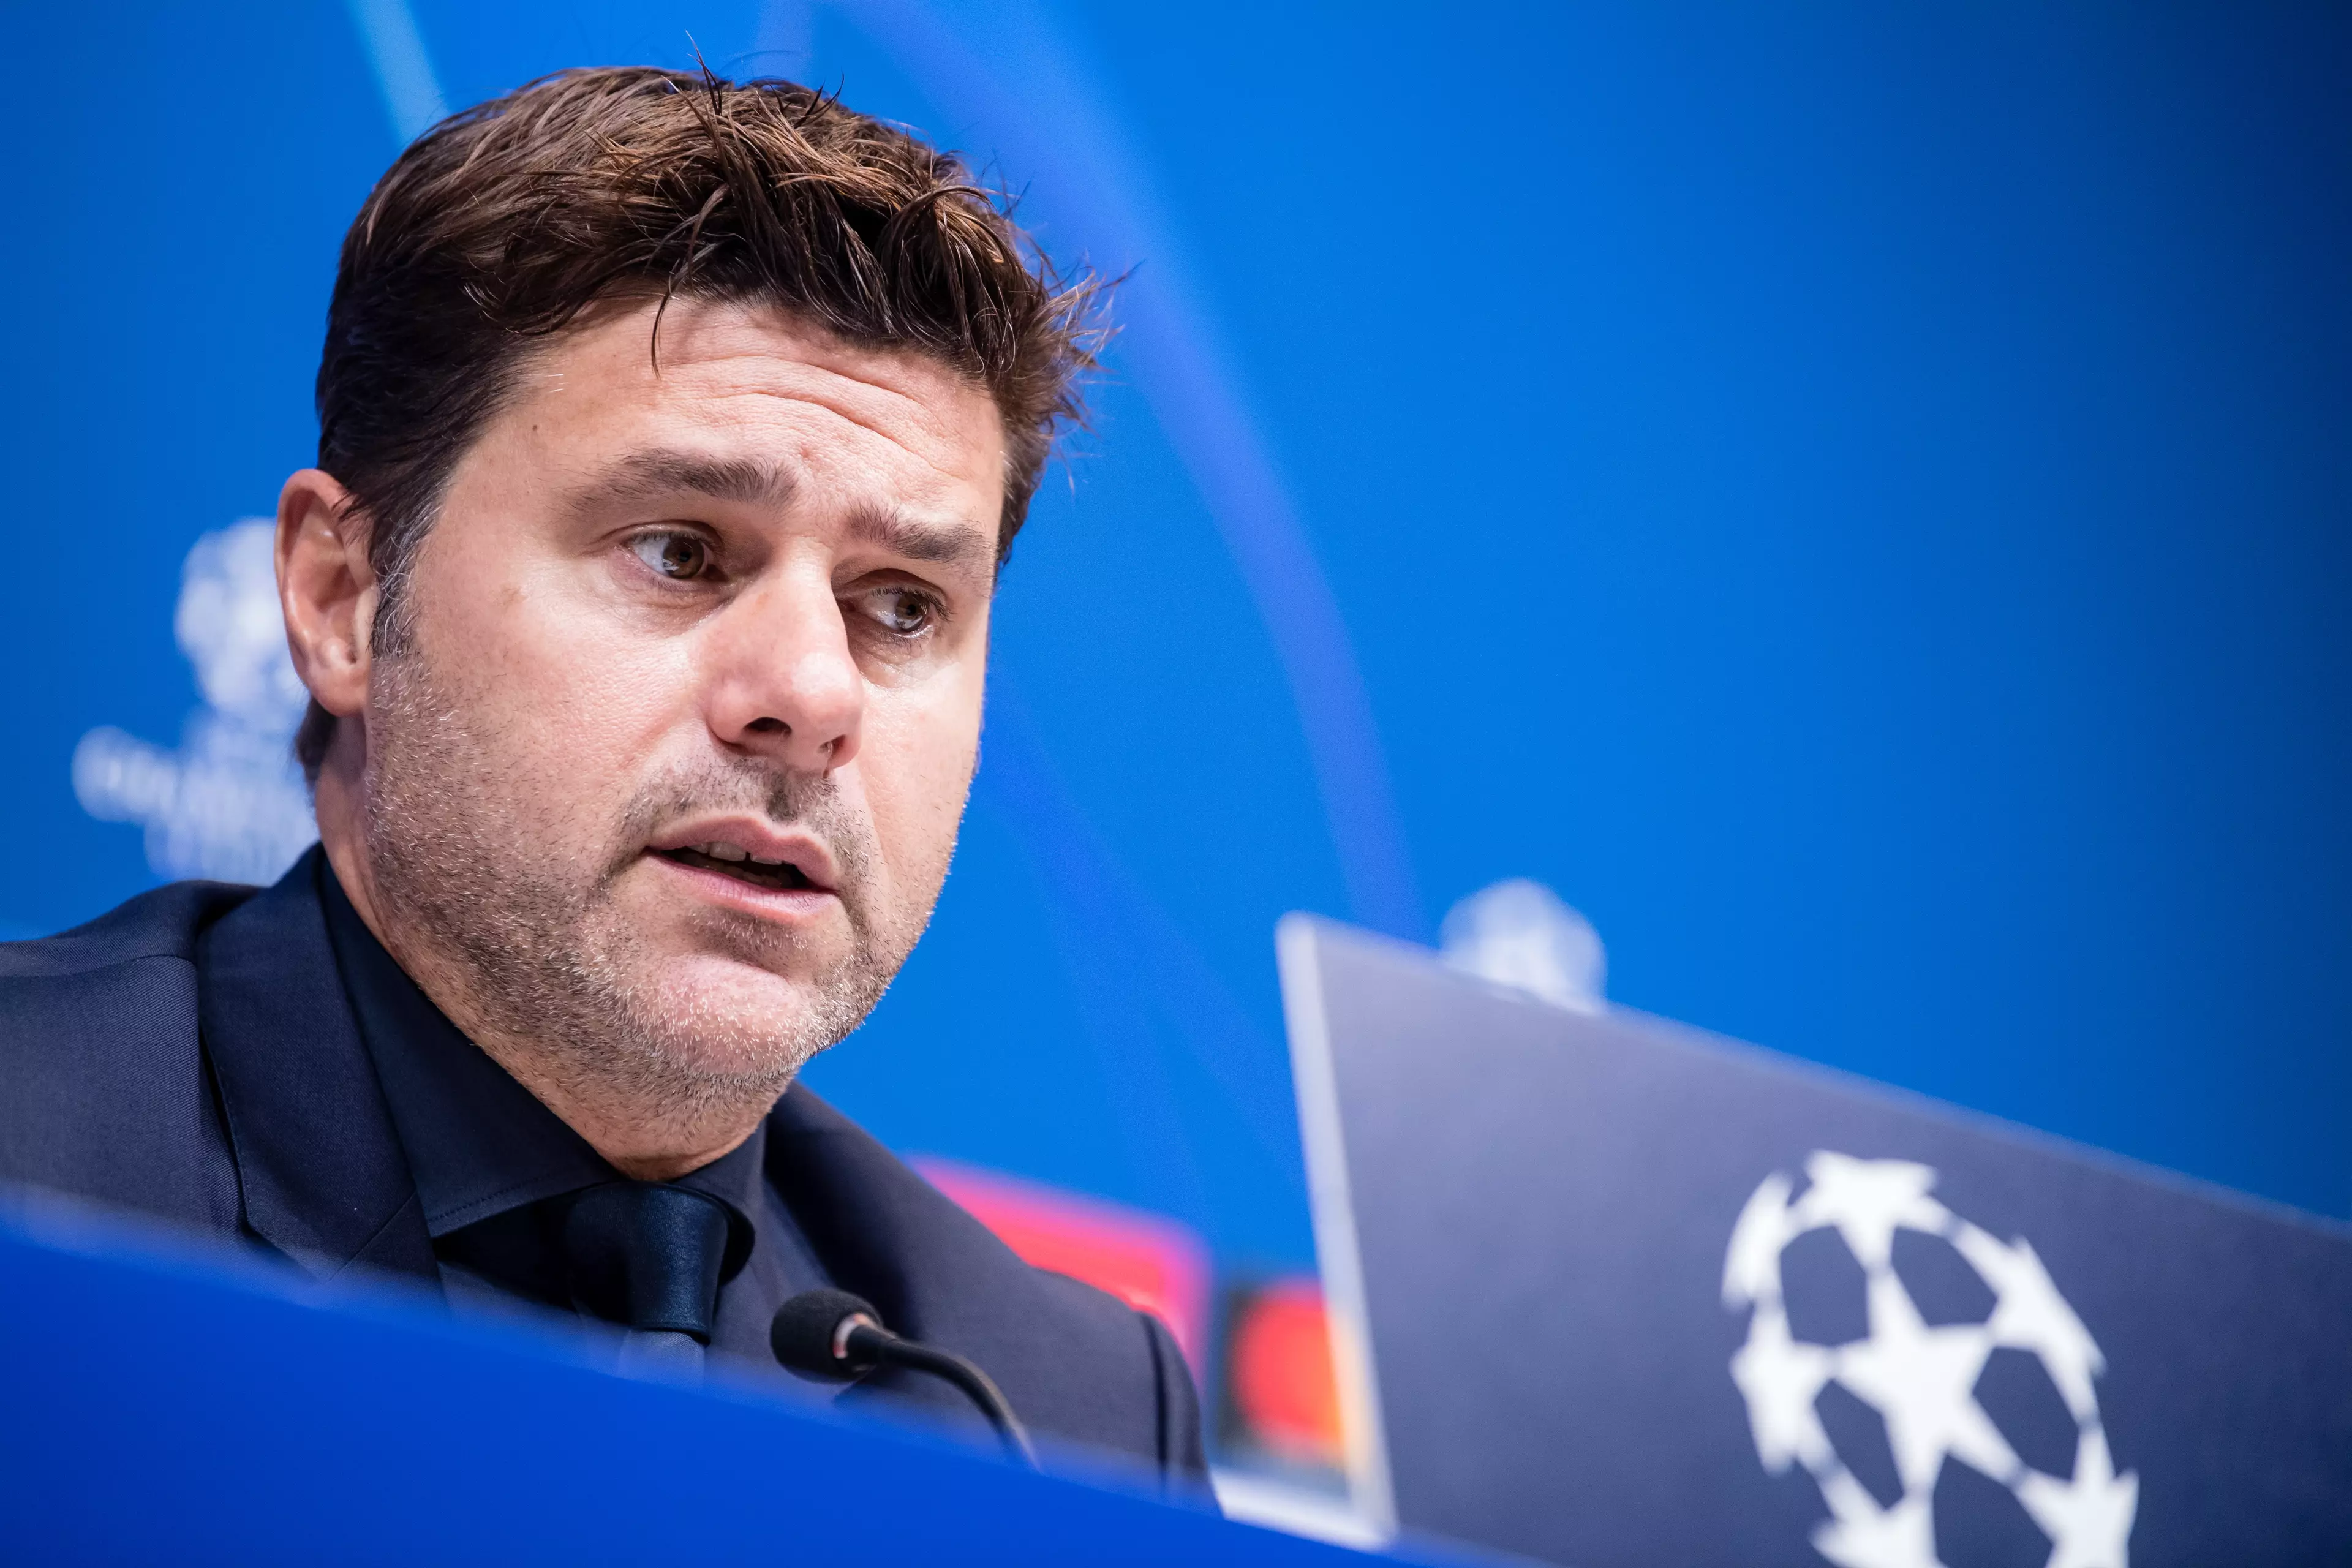 Things aren't going well for Pochettino right now. Image: PA Images